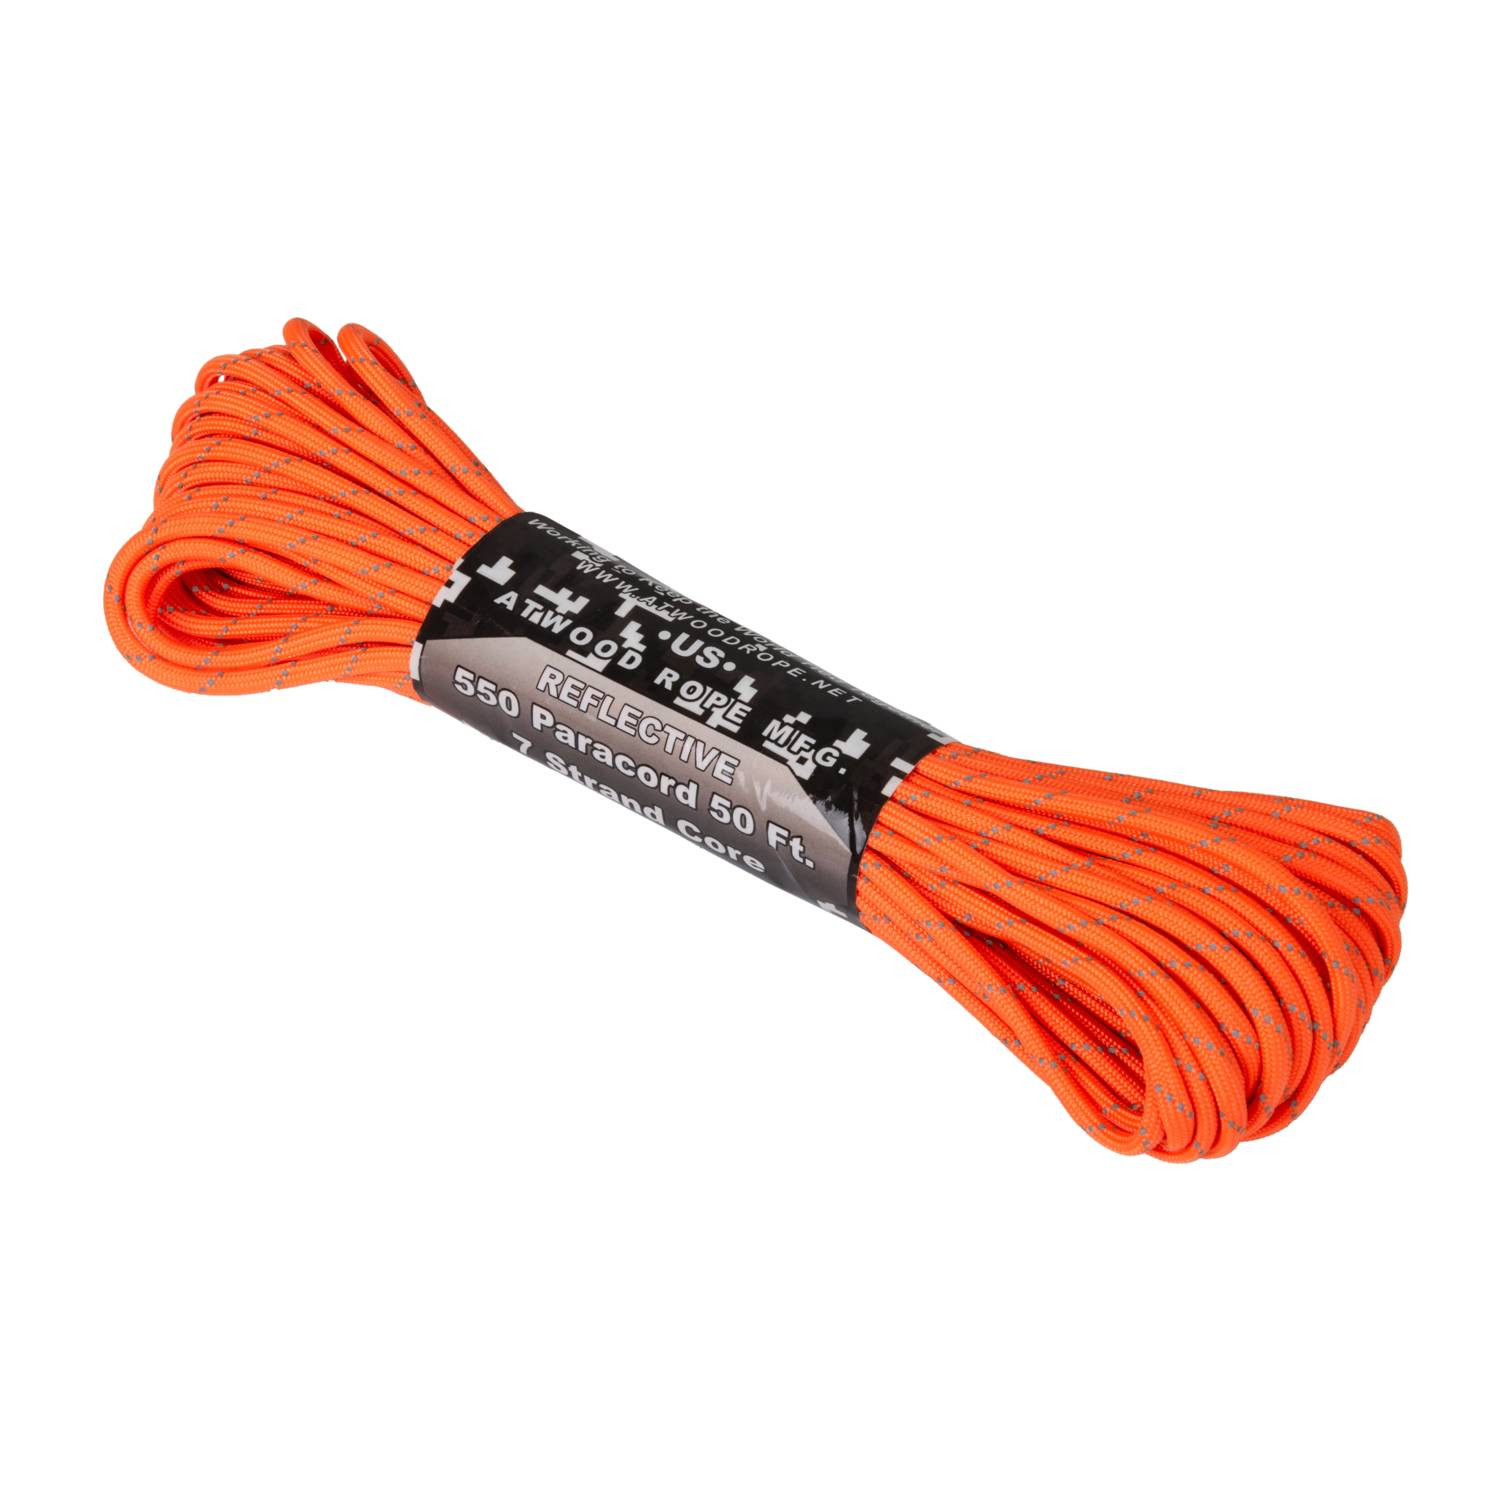 Orange with Reflective Tracers Military Grade 550 Paracord 50 Feet 